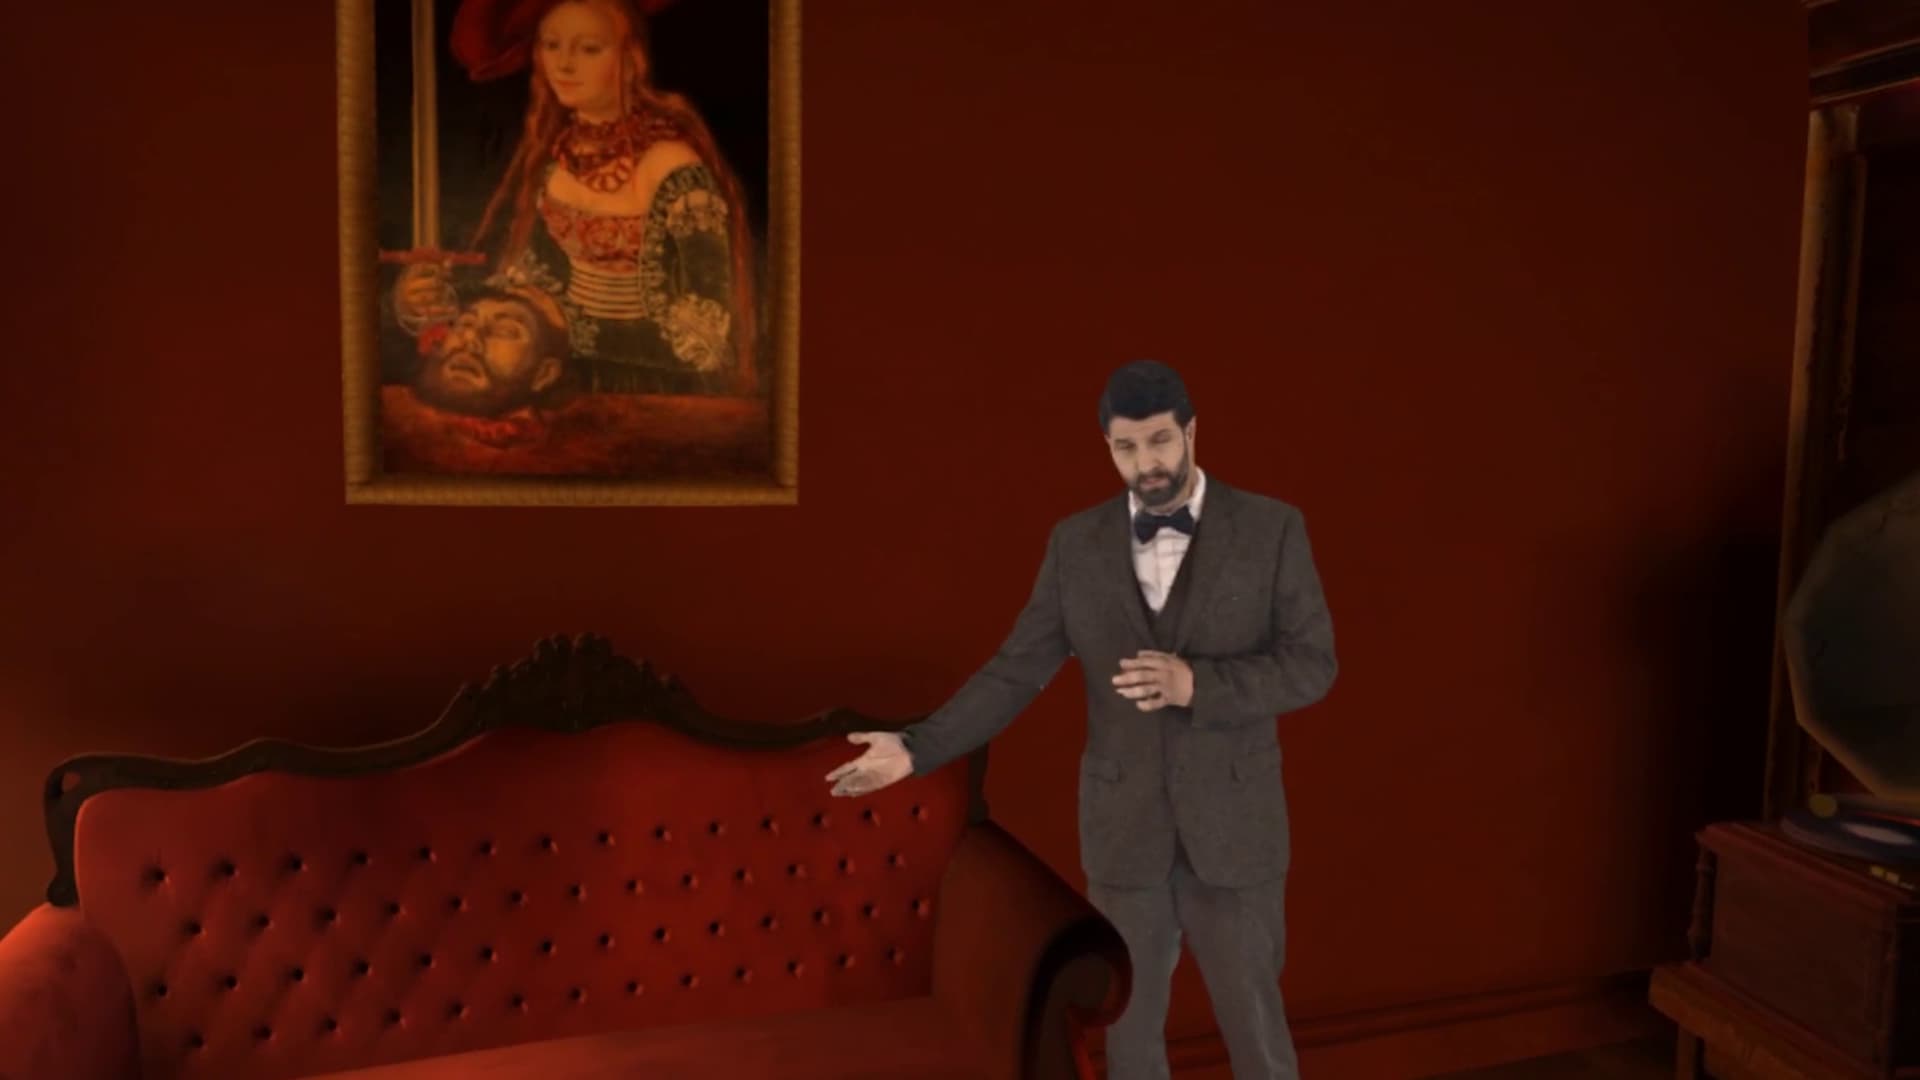 A holographic image of a person in a suit gesturing for the viewer to sit down on a couch beside them